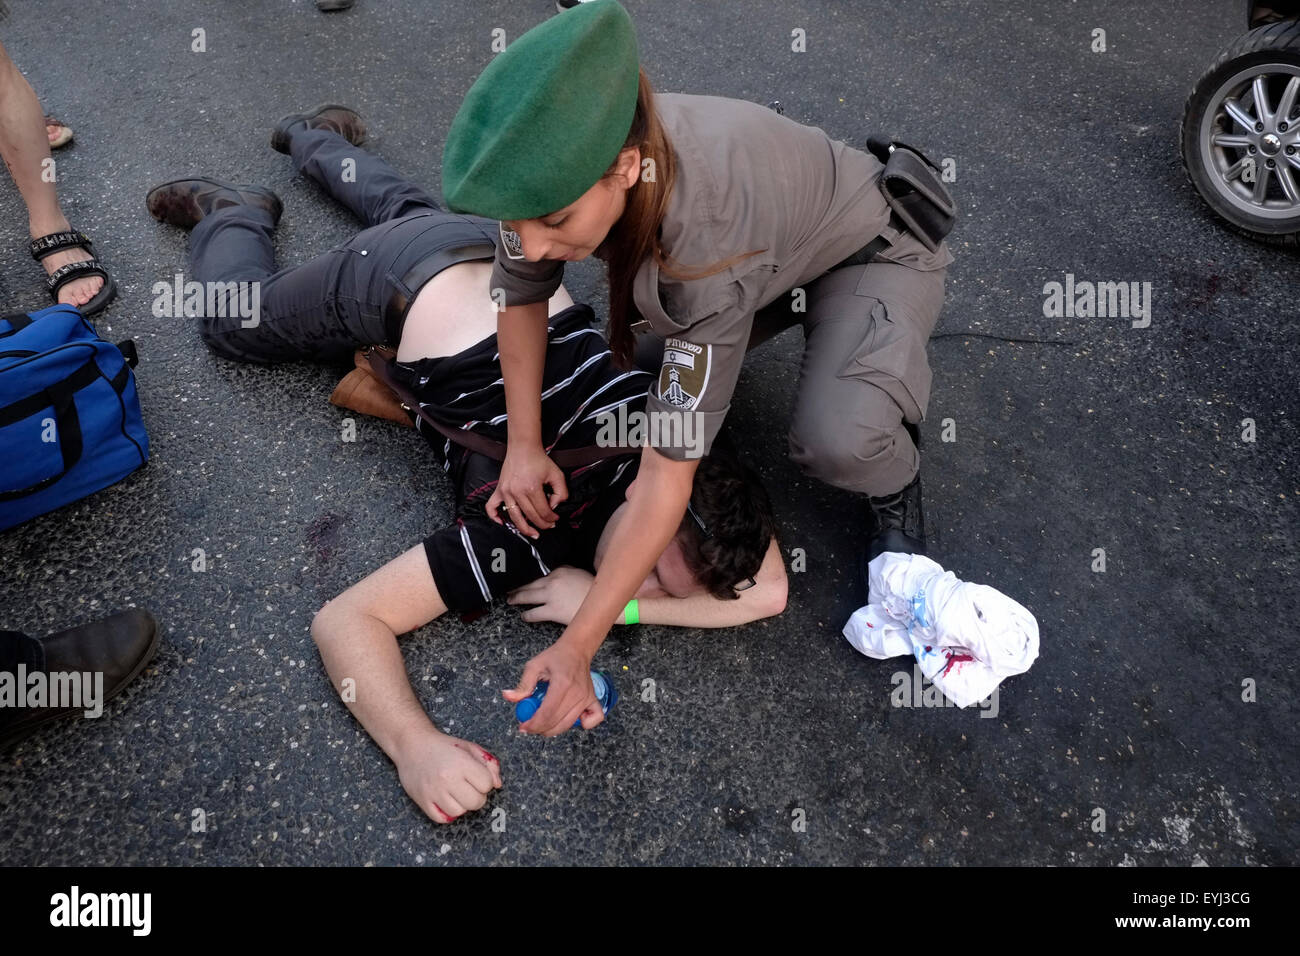 An Israeli border police woman holds an injured man after being stabbed by an ultra Orthodox Jewish man at the annual Gay Pride Parade in Jerusalem on 30 July 2015. Israel is widely seen as having liberal gay rights policies, despite the hostility shown towards homosexuals, particularly men, from the ultra-Orthodox Jewish community Credit:  Eddie Gerald/Alamy Live News Stock Photo